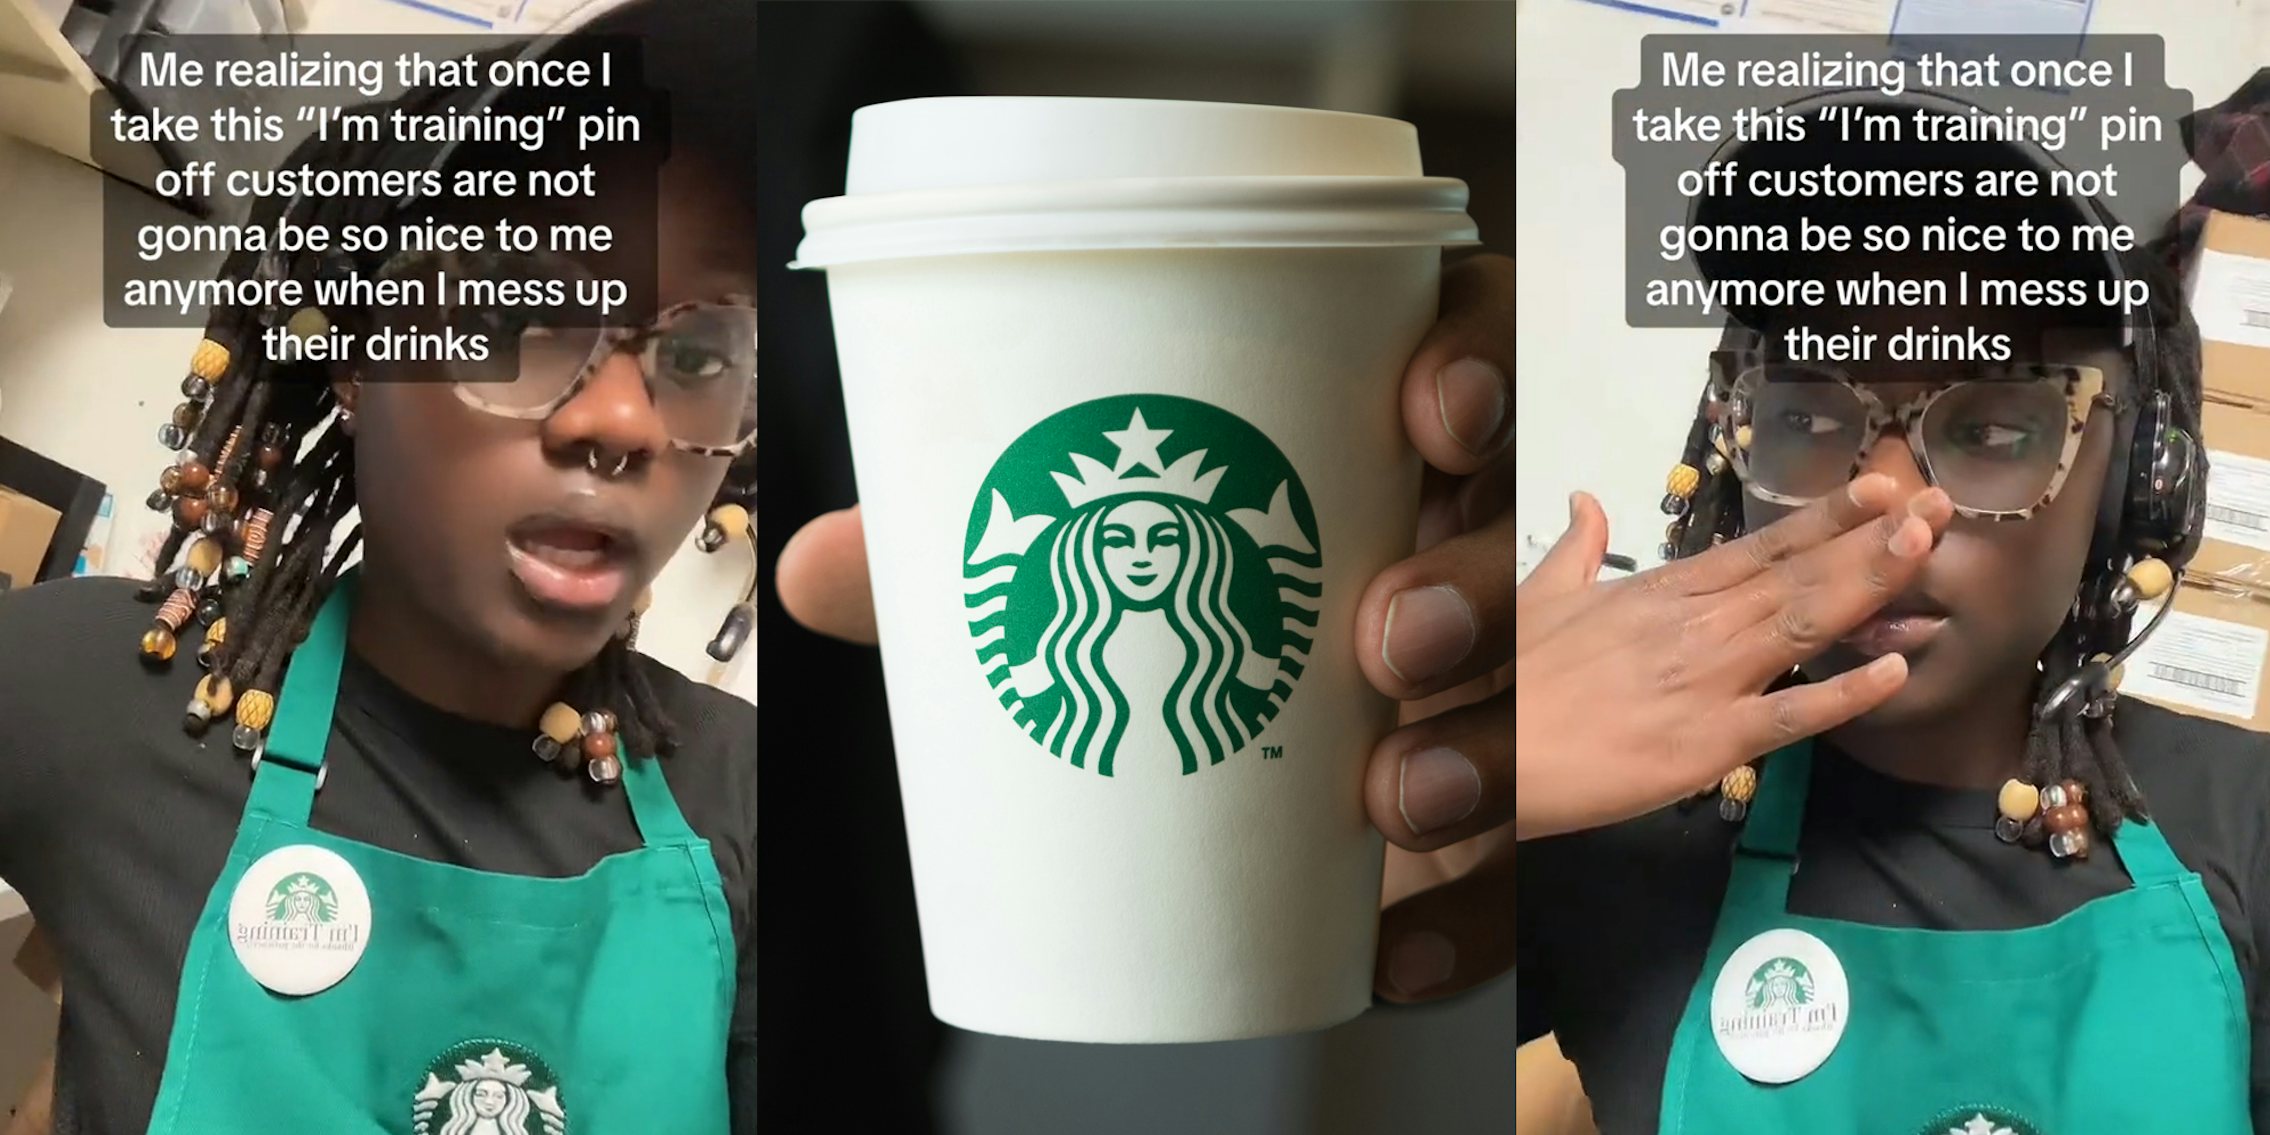 Starbucks employee with caption 'Me realizing that once I take this 'I'm training' pin off customers are not gonna be so nice to me anymore when I mess up their drinks' (l) hand holding Starbucks drink (c) Starbucks employee with caption 'Me realizing that once I take this 'I'm training' pin off customers are not gonna be so nice to me anymore when I mess up their drinks' (r)